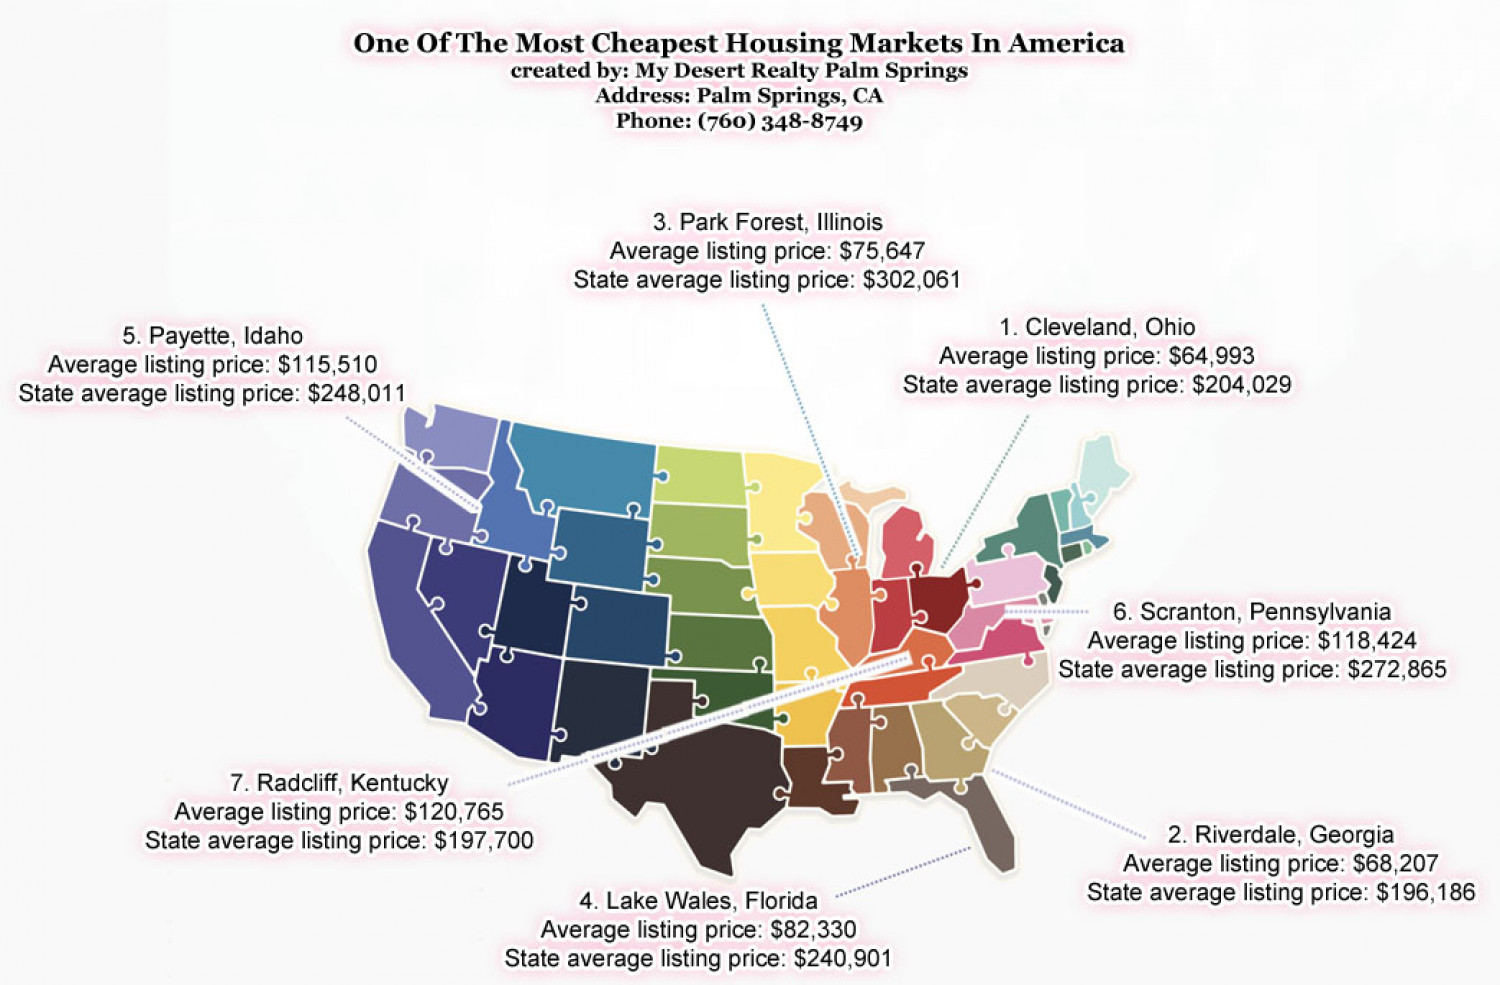 One Of The Most Cheapest Housing Markets In America Infographic